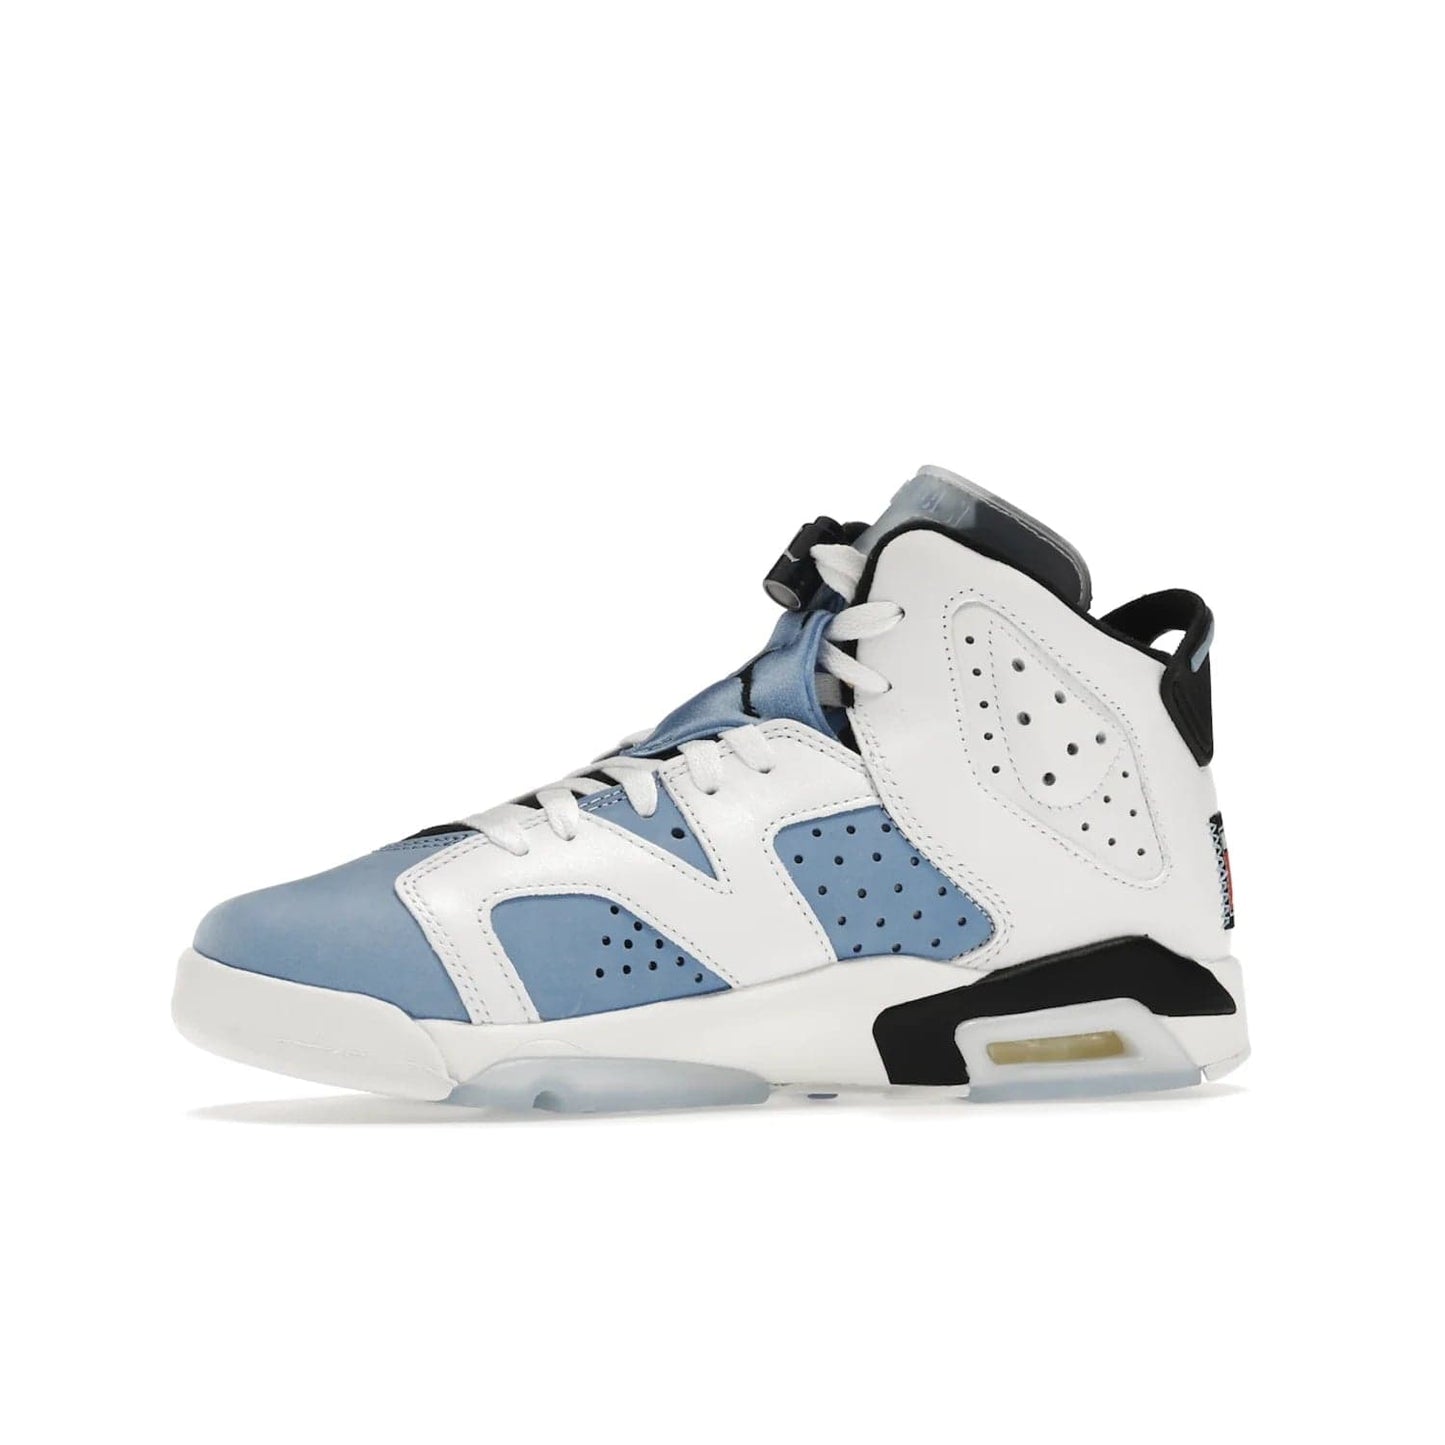 Jordan 6 Retro UNC White (GS) - Image 17 - Only at www.BallersClubKickz.com - Air Jordan 6 Retro UNC White GS: Michael Jordan alma mater, UNC Tar Heels, featuring colorway, nubuck, leather, Jumpman branding and a visible Air unit. Translucent blue/white outsole, perfect for completing sneaker rotation.